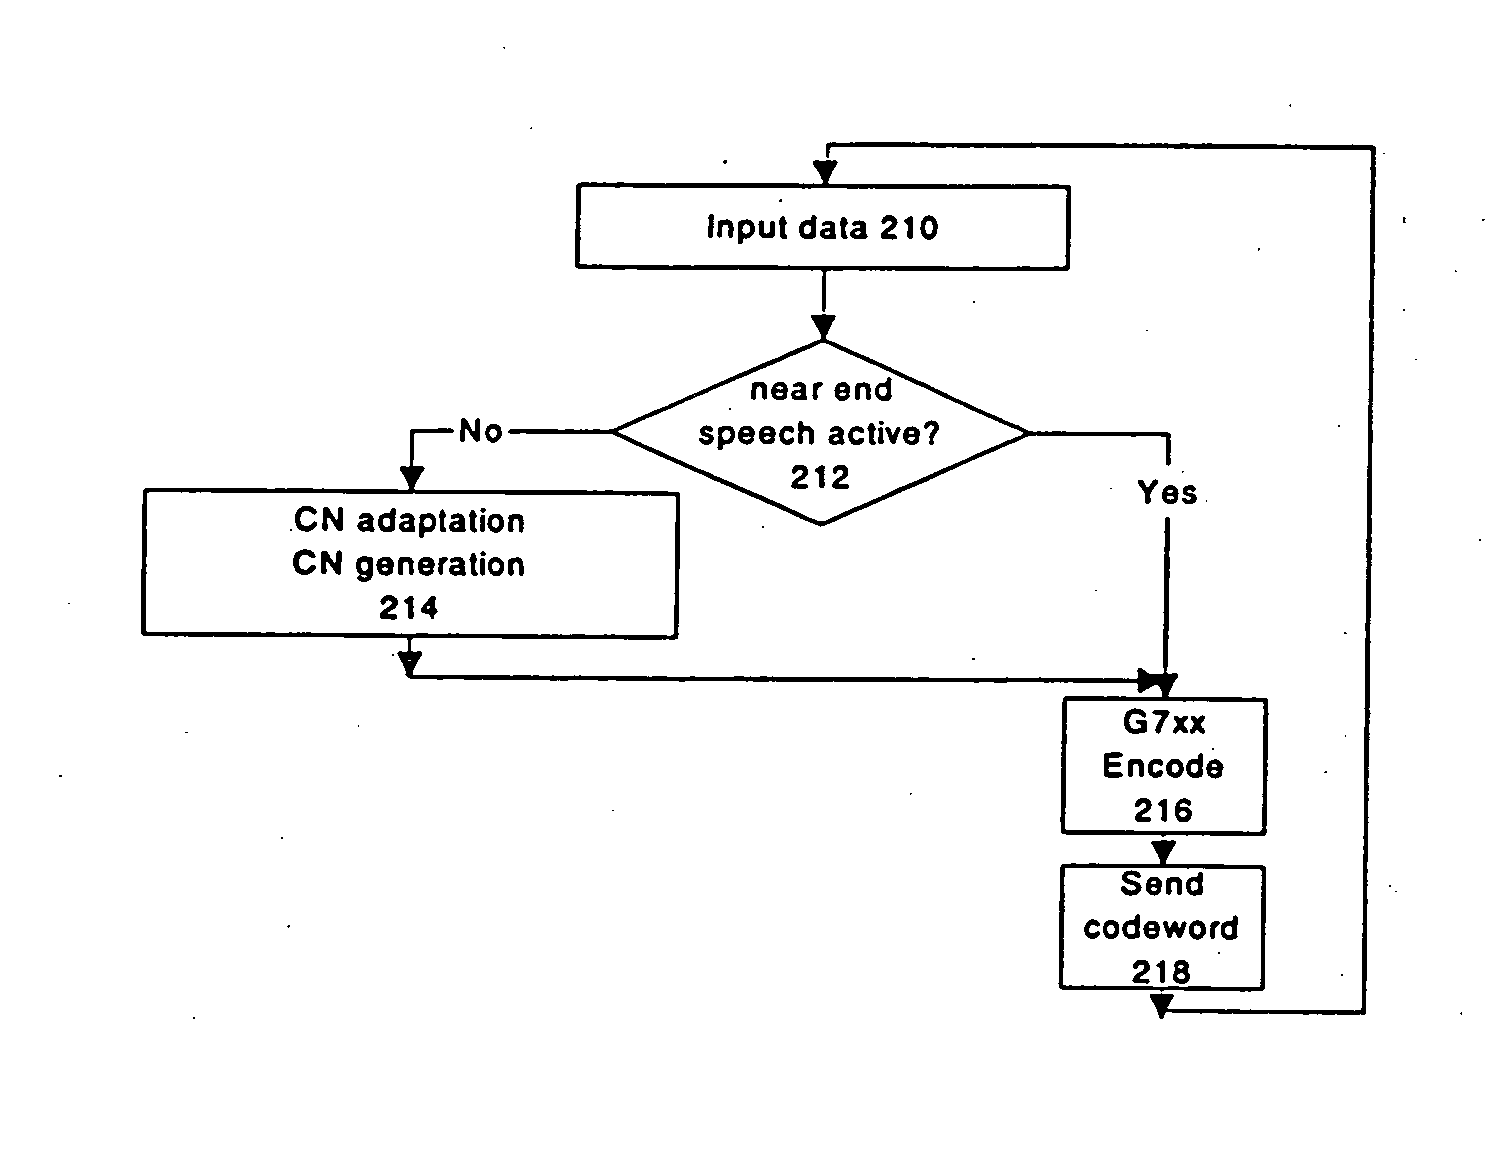 Method and system for generating colored comfort noise in the absence of silence insertion description packets